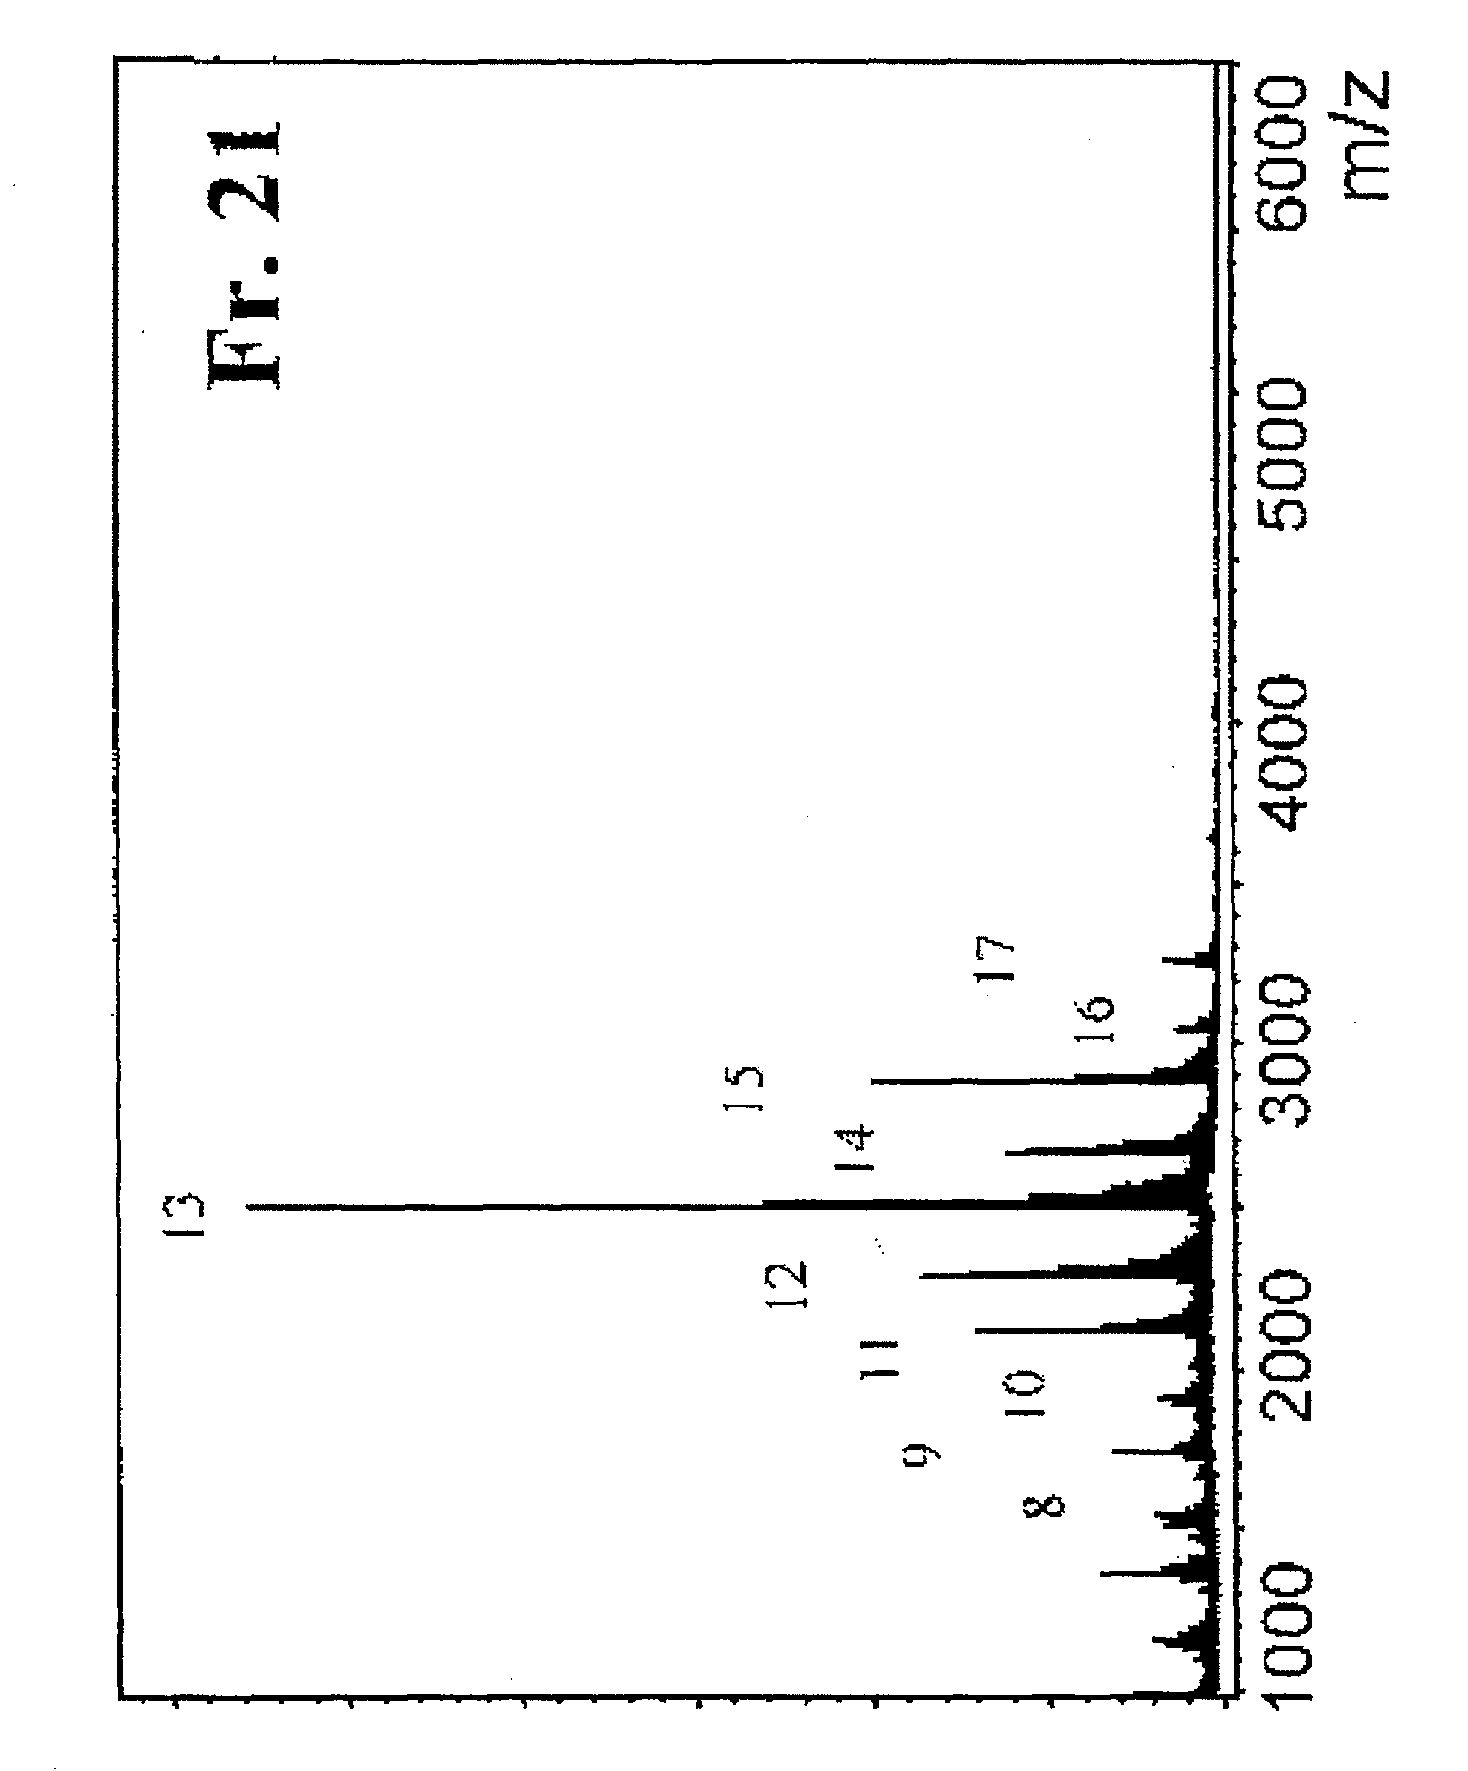 Novel process for preparation of chondroitin fraction